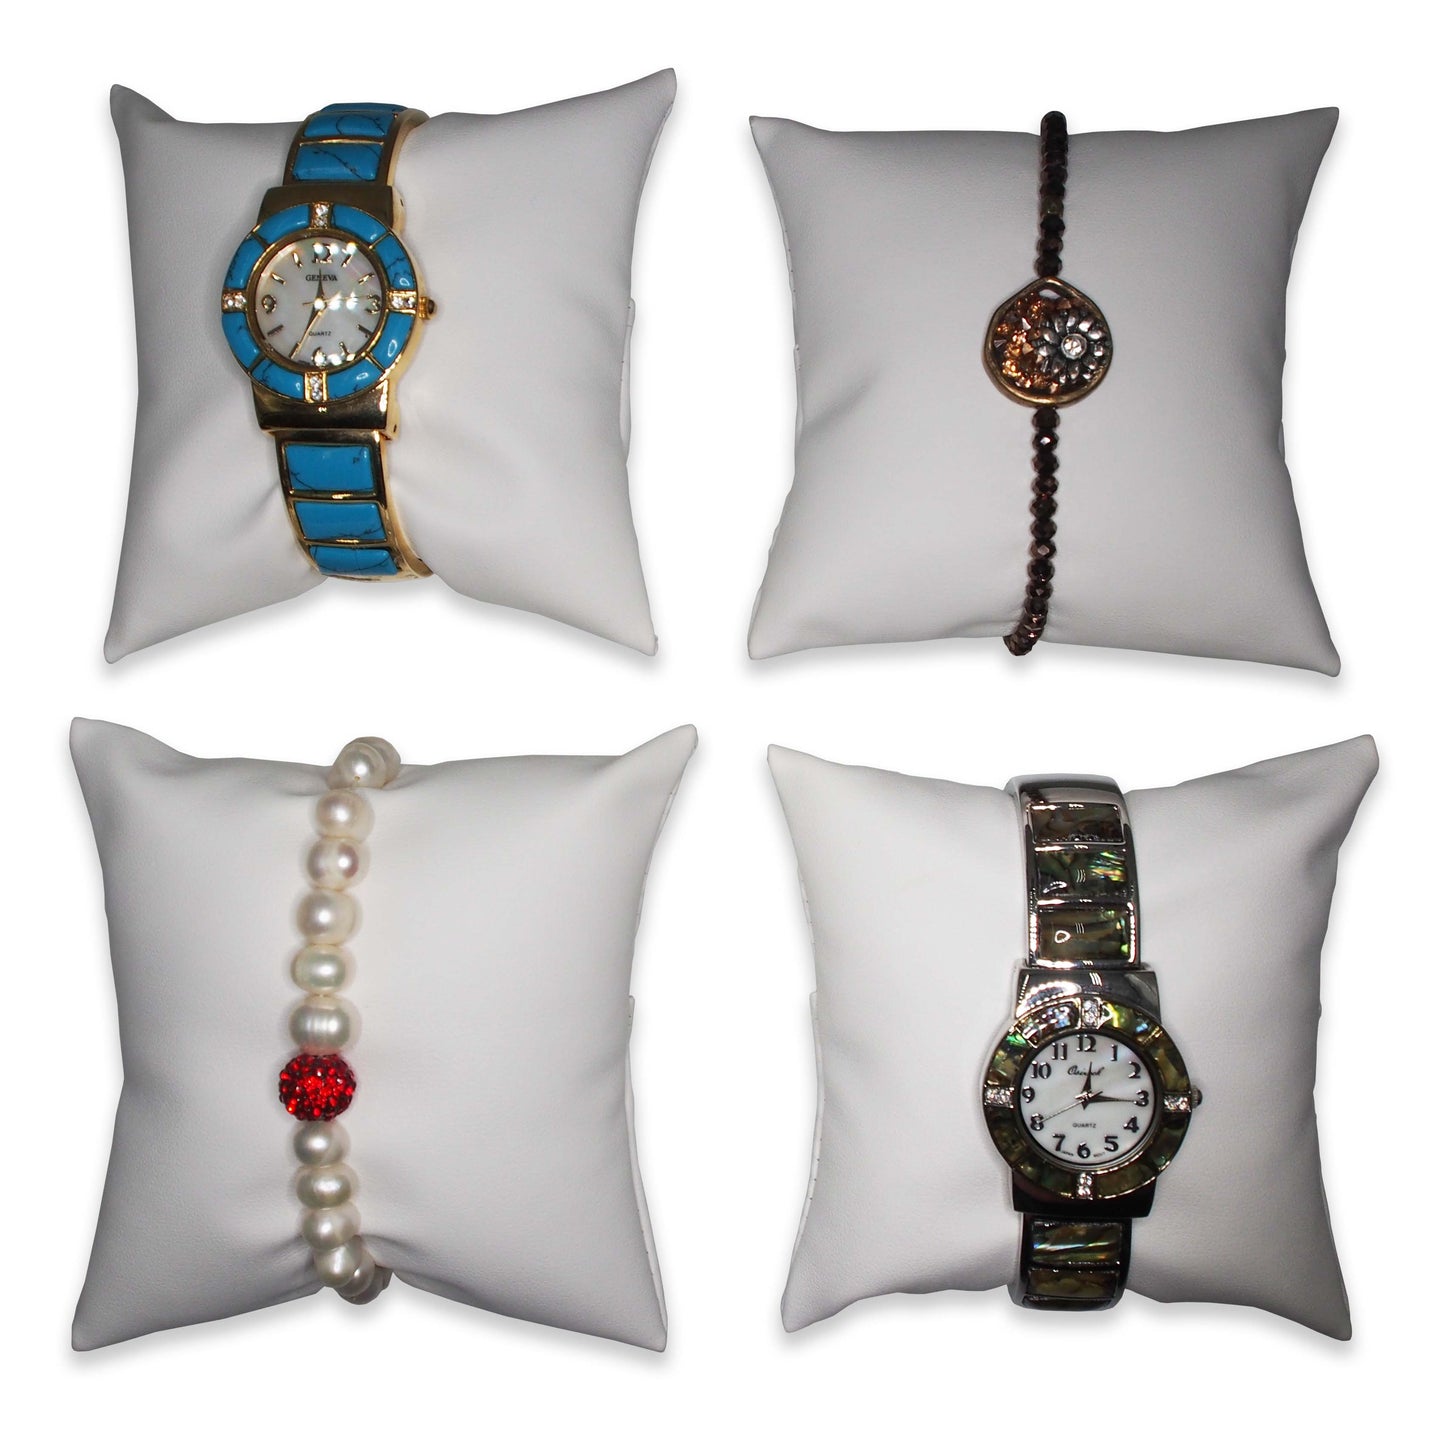 4" White Leatherette Pillow Displays